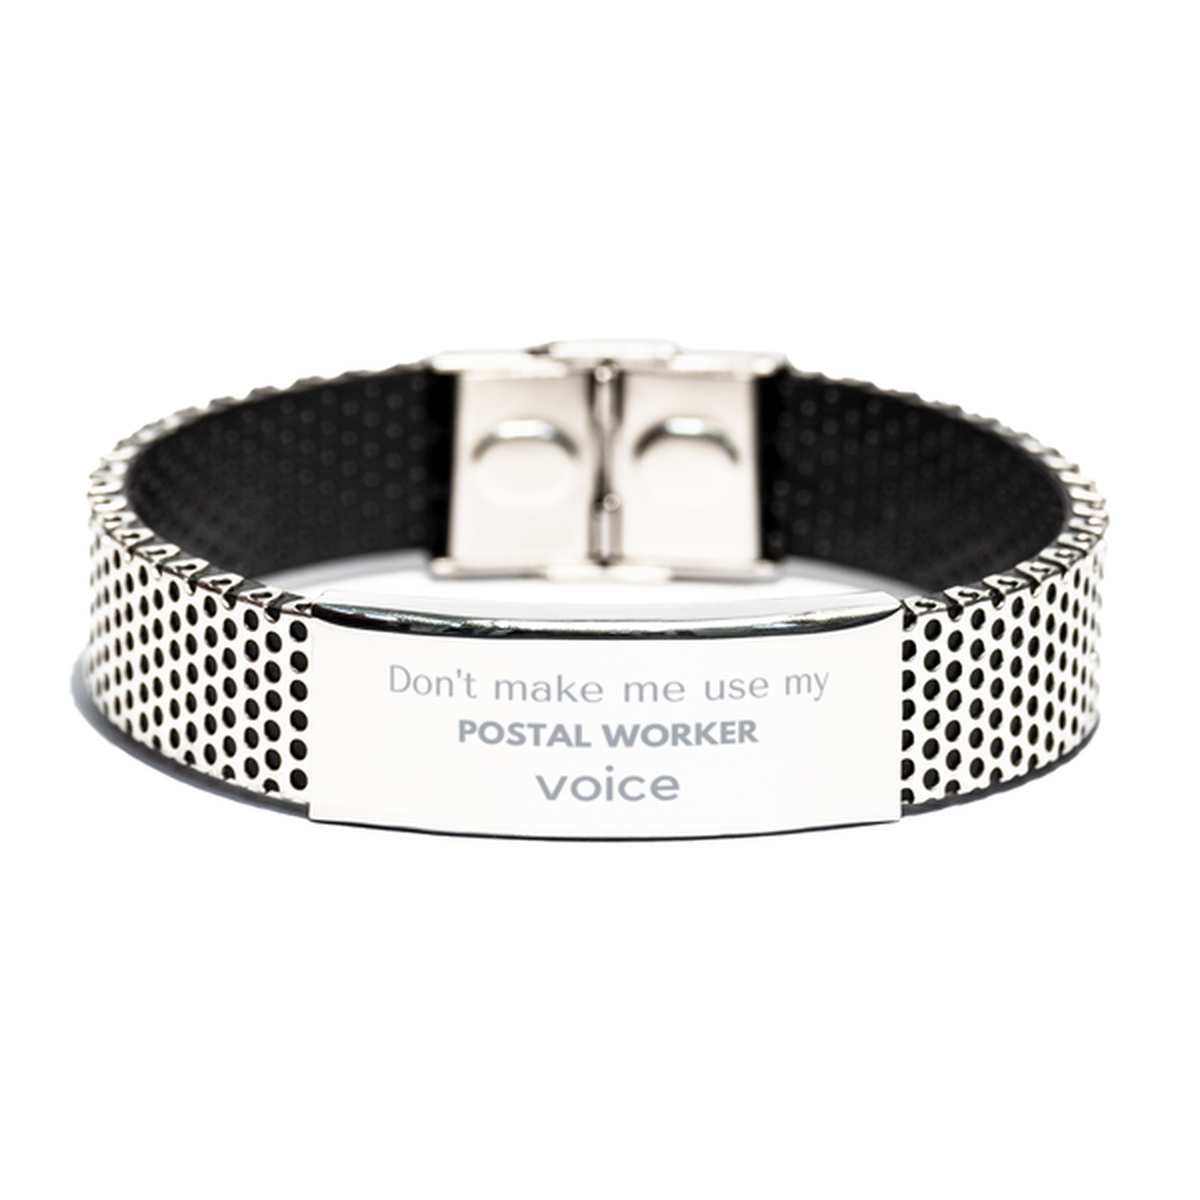 Don't make me use my Postal Worker voice, Sarcasm Postal Worker Gifts, Christmas Postal Worker Stainless Steel Bracelet Birthday Unique Gifts For Postal Worker Coworkers, Men, Women, Colleague, Friends